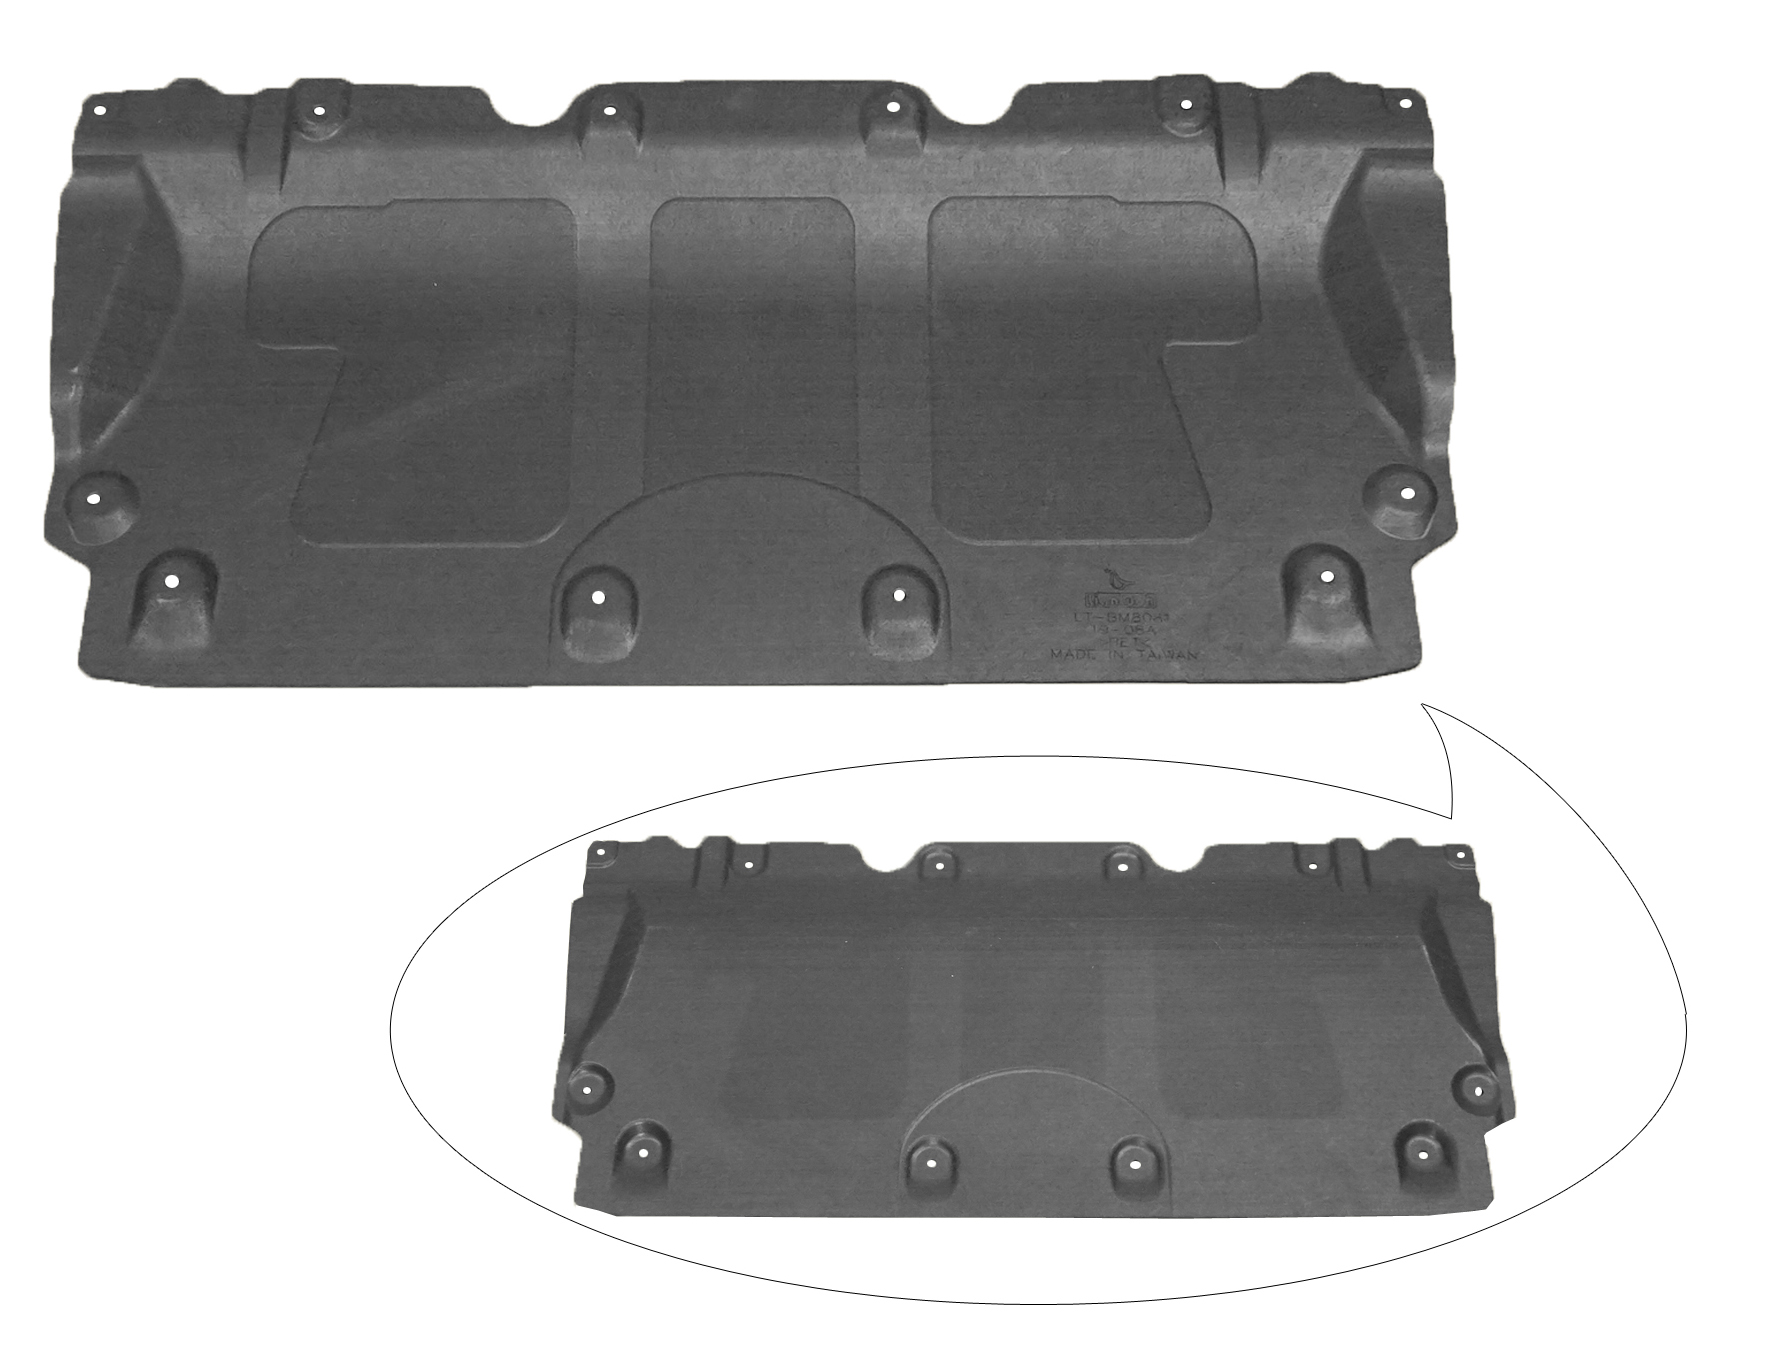 Aftermarket UNDER ENGINE COVERS for BMW - 230I, 230i,21-23,Lower engine cover